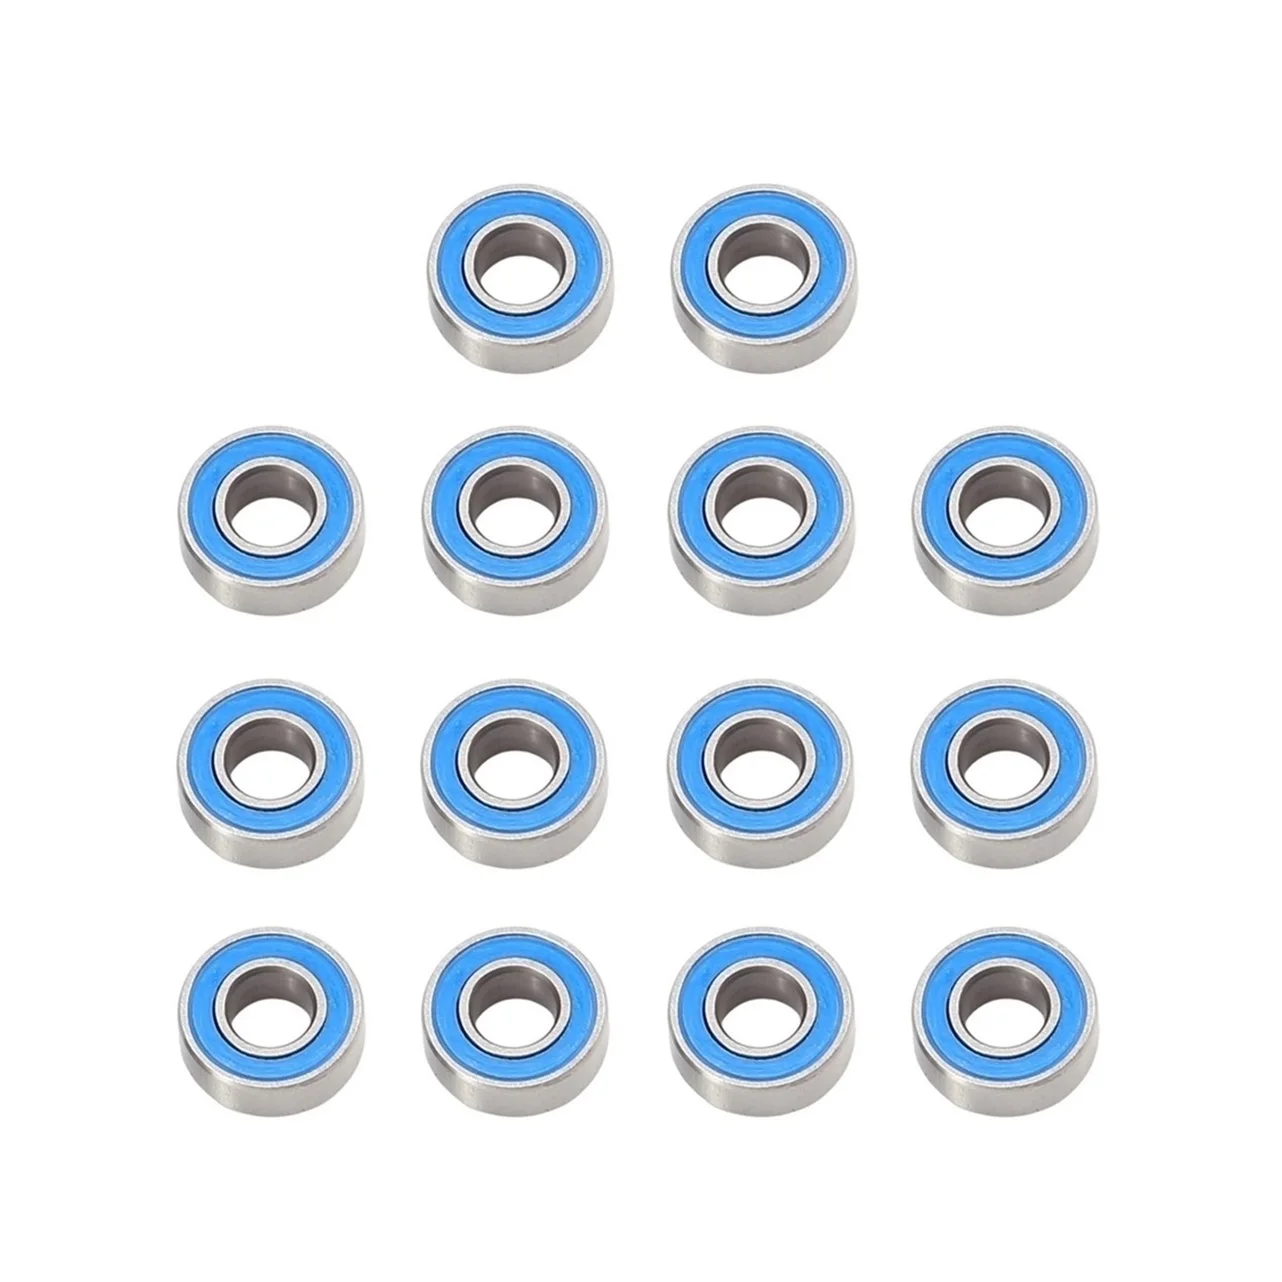 

14pcs Sealed Bearing Kit for Tamiya DT-02 DT-03 DT02 DT03 RC Car Upgrade Parts Accessories